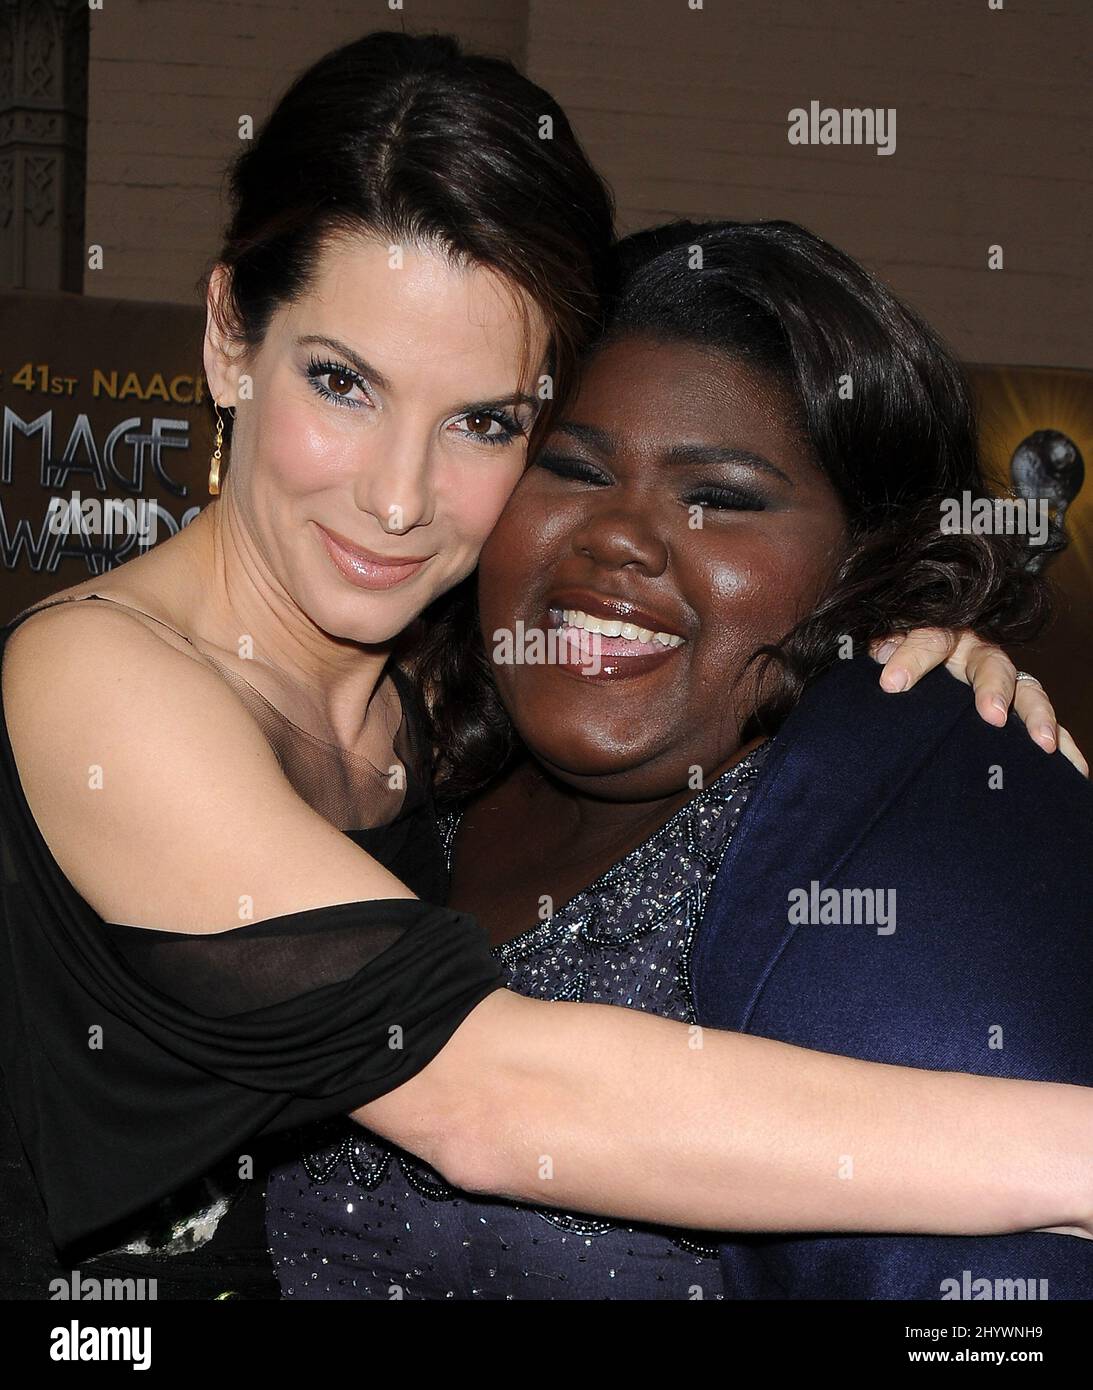 Sandra Bullock and Gabourey Sidibe arriving for the 41st NAACP Image Awards held at the Shrine Auditorium in Los Angeles, California, USA. Stock Photo